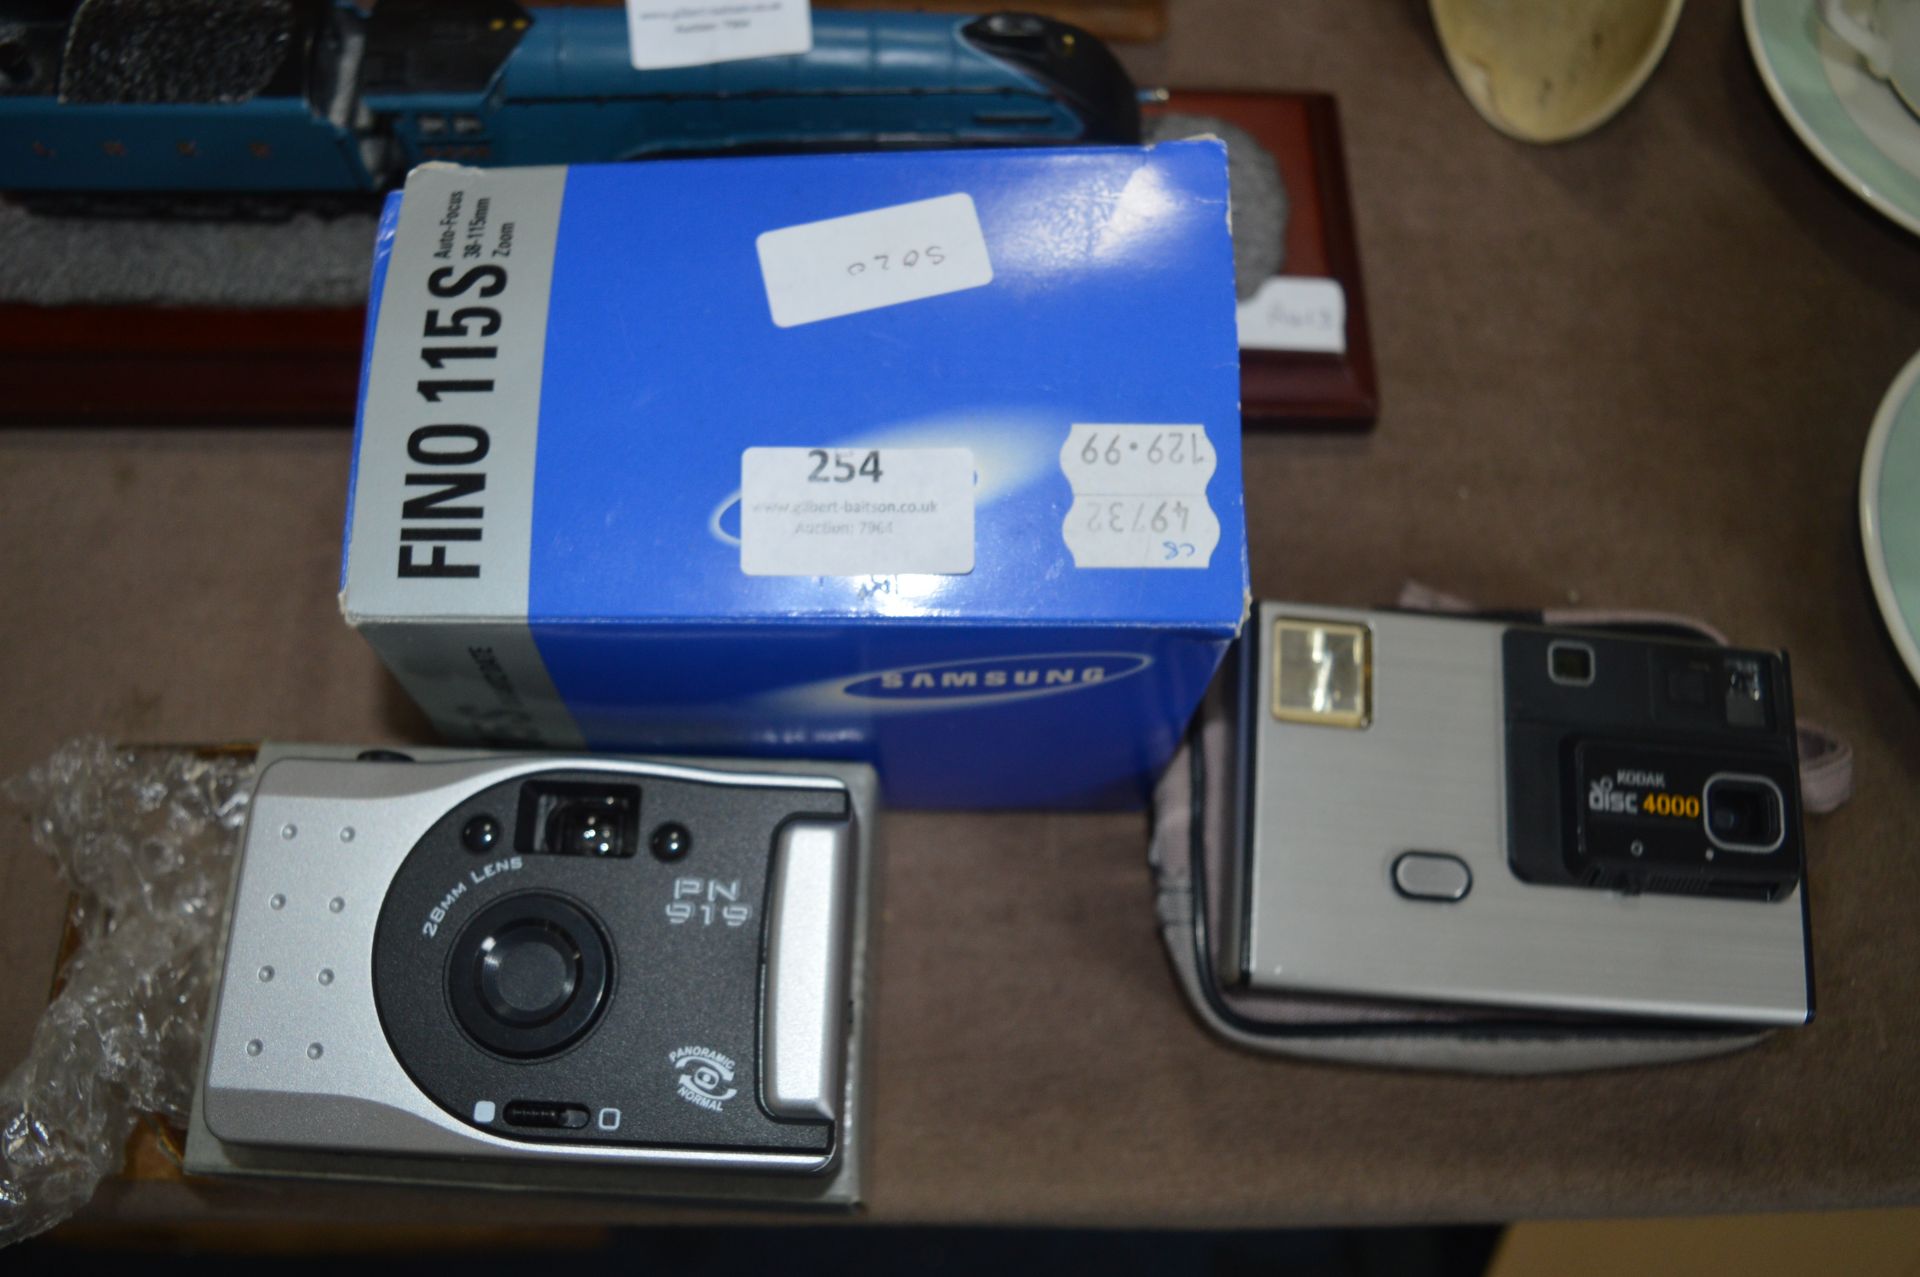 Three Cameras including Samsung, Kodak and One Other